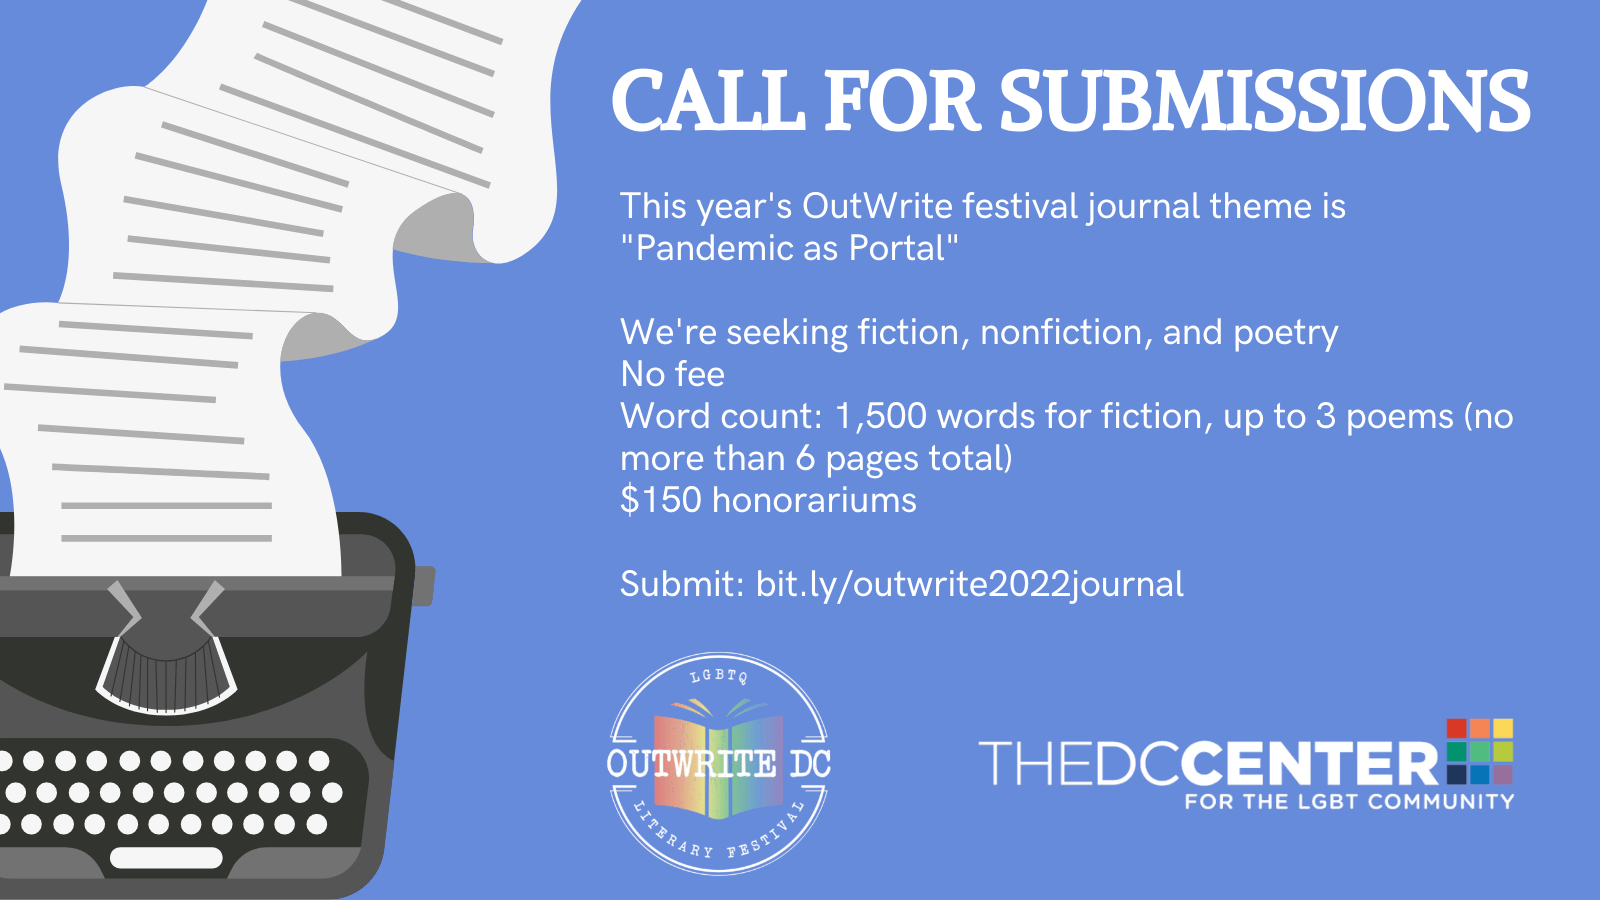 Light blue background with a typewriter graphic on the left with paper trailing out of it. Headline: CALL FOR SUBMISSIONS. Text: This year's OutWrite festival journal theme is "Pandemic as Portal". We're seeking fiction, nonfiction, and poetry. No fee. Word count: 1500 words for fiction, up to 3 poems, no more than 6 pages total. $150 honorariums. Submit: bit.ly/outwrite2022journal. Rainbow logos for OutWrite and The DC Center.